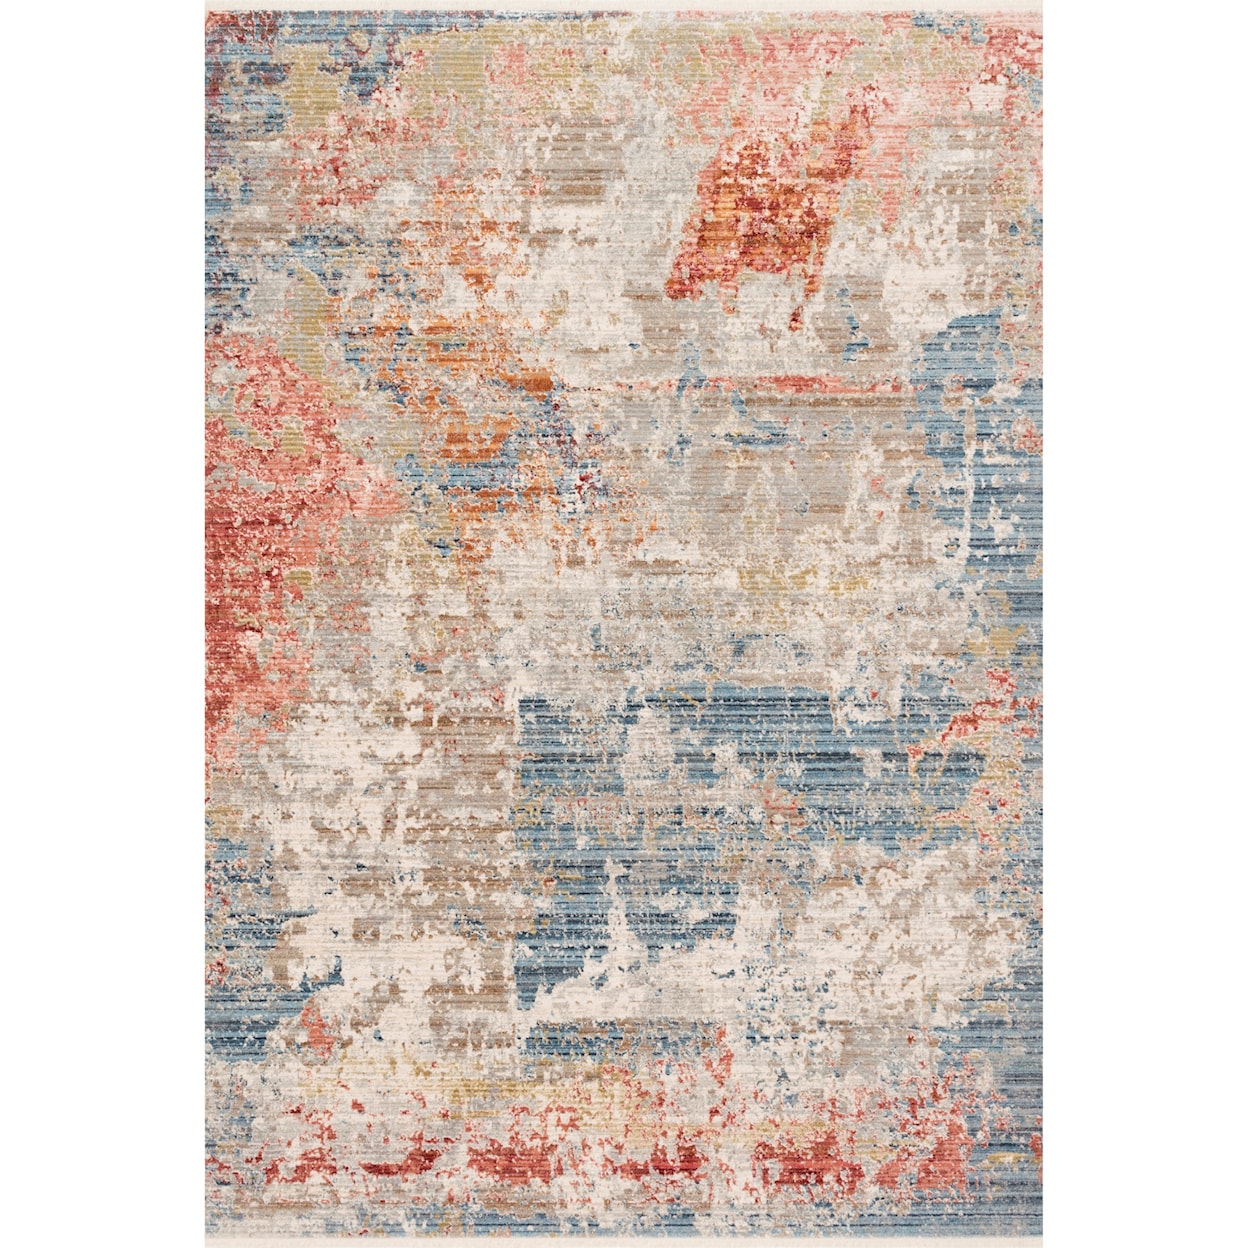 Reeds Rugs Claire 7'10" x 10'2" Grey / Multi Rug